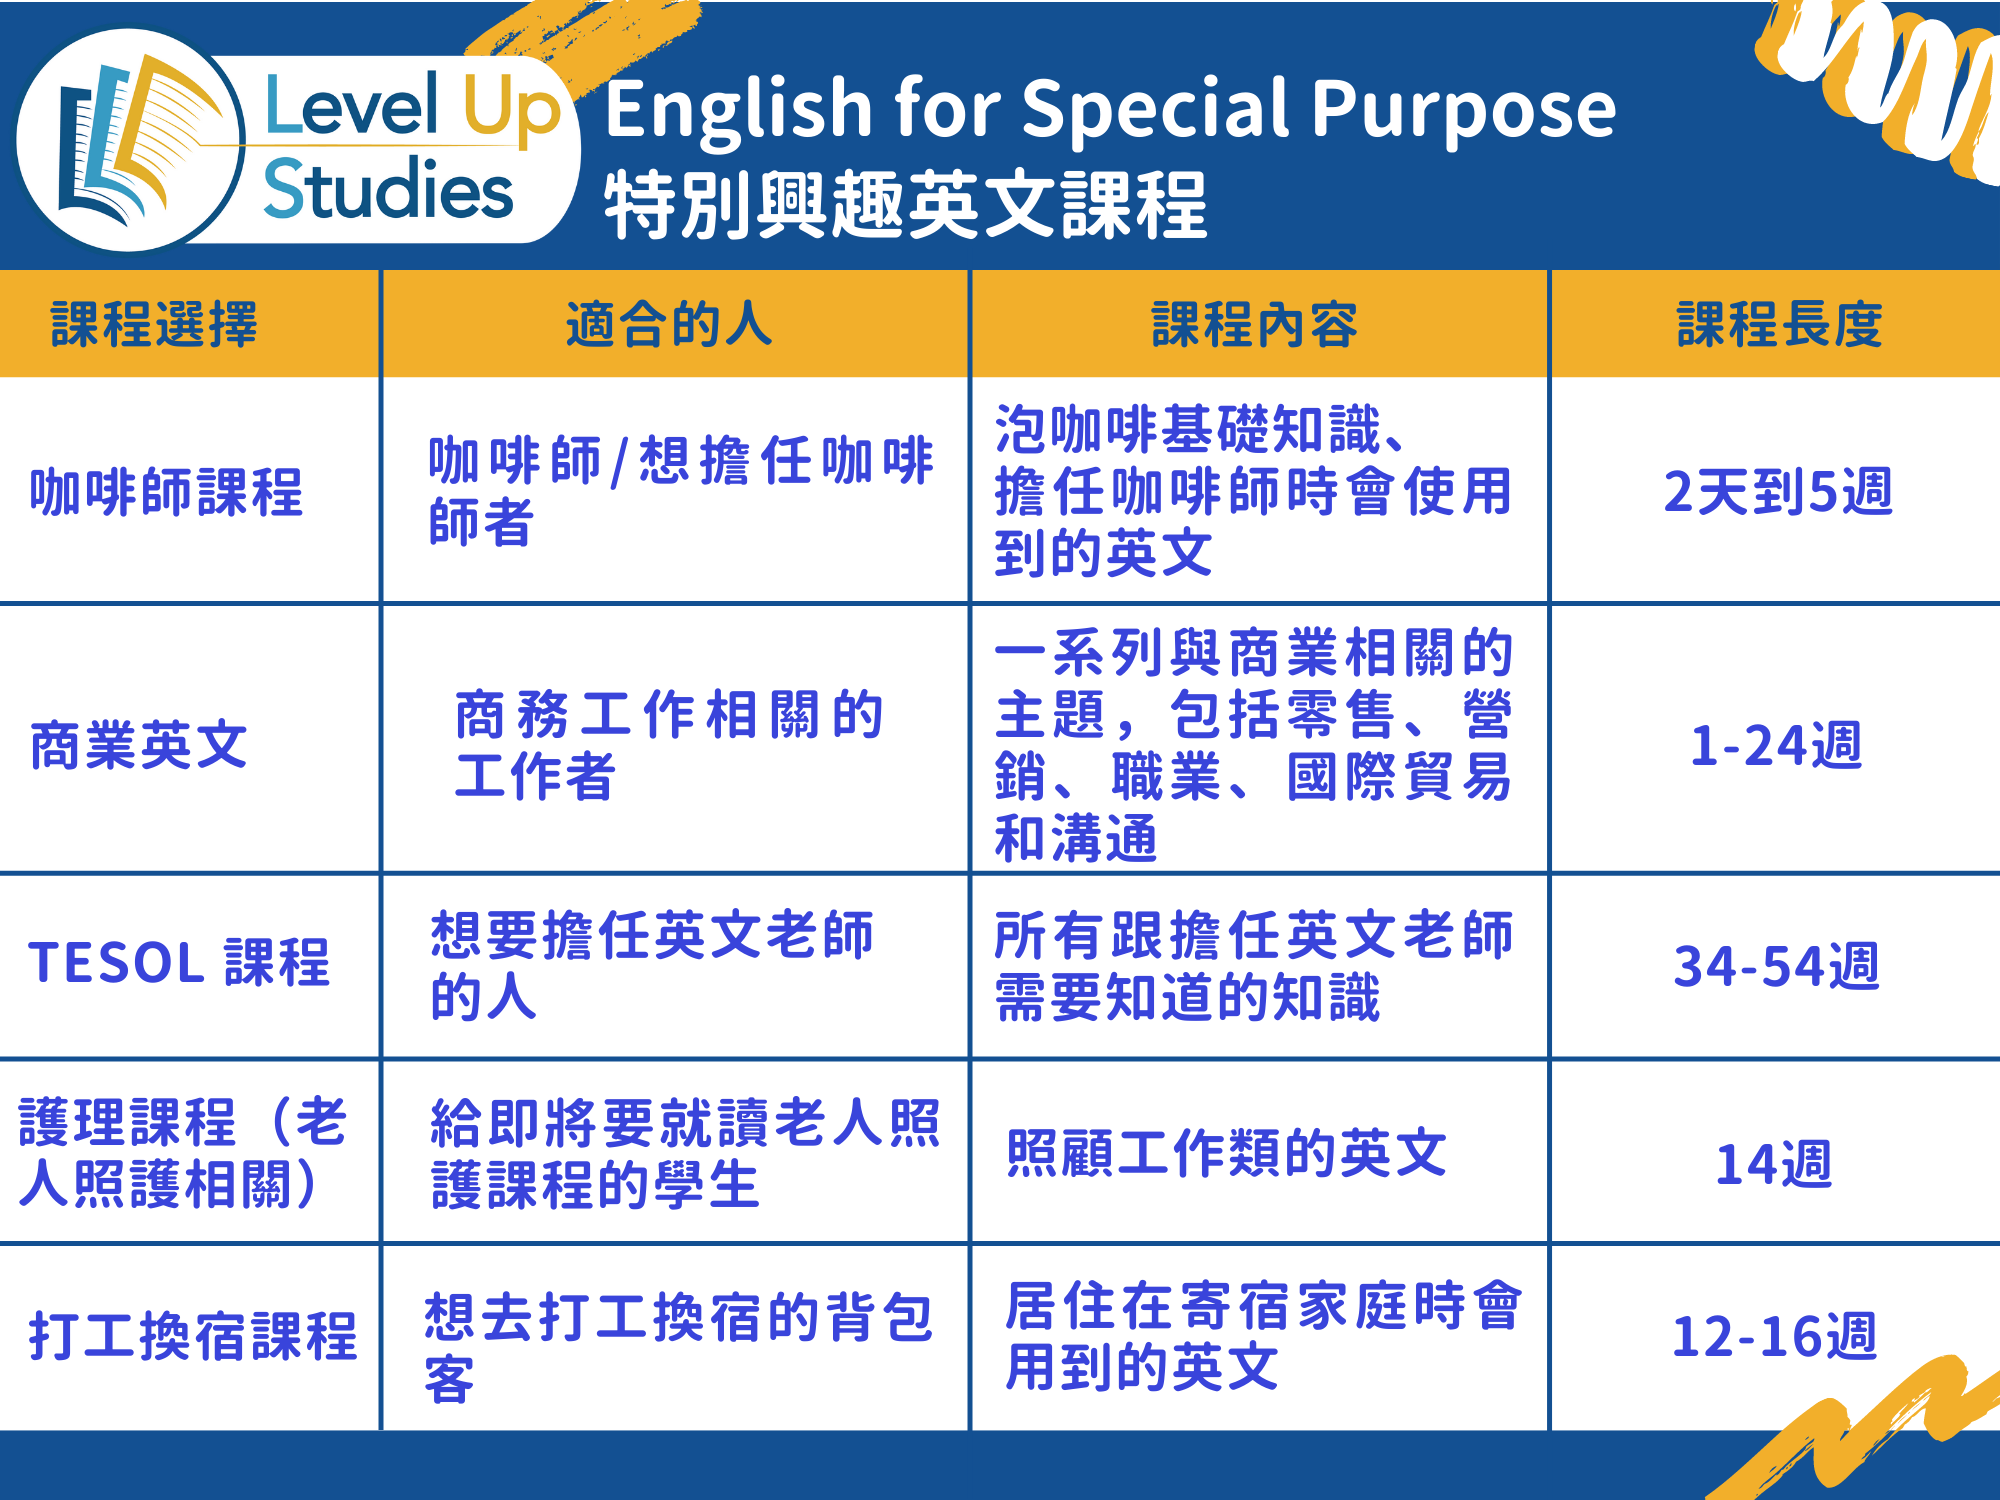 English for Special Purpose 特別興趣英文課程